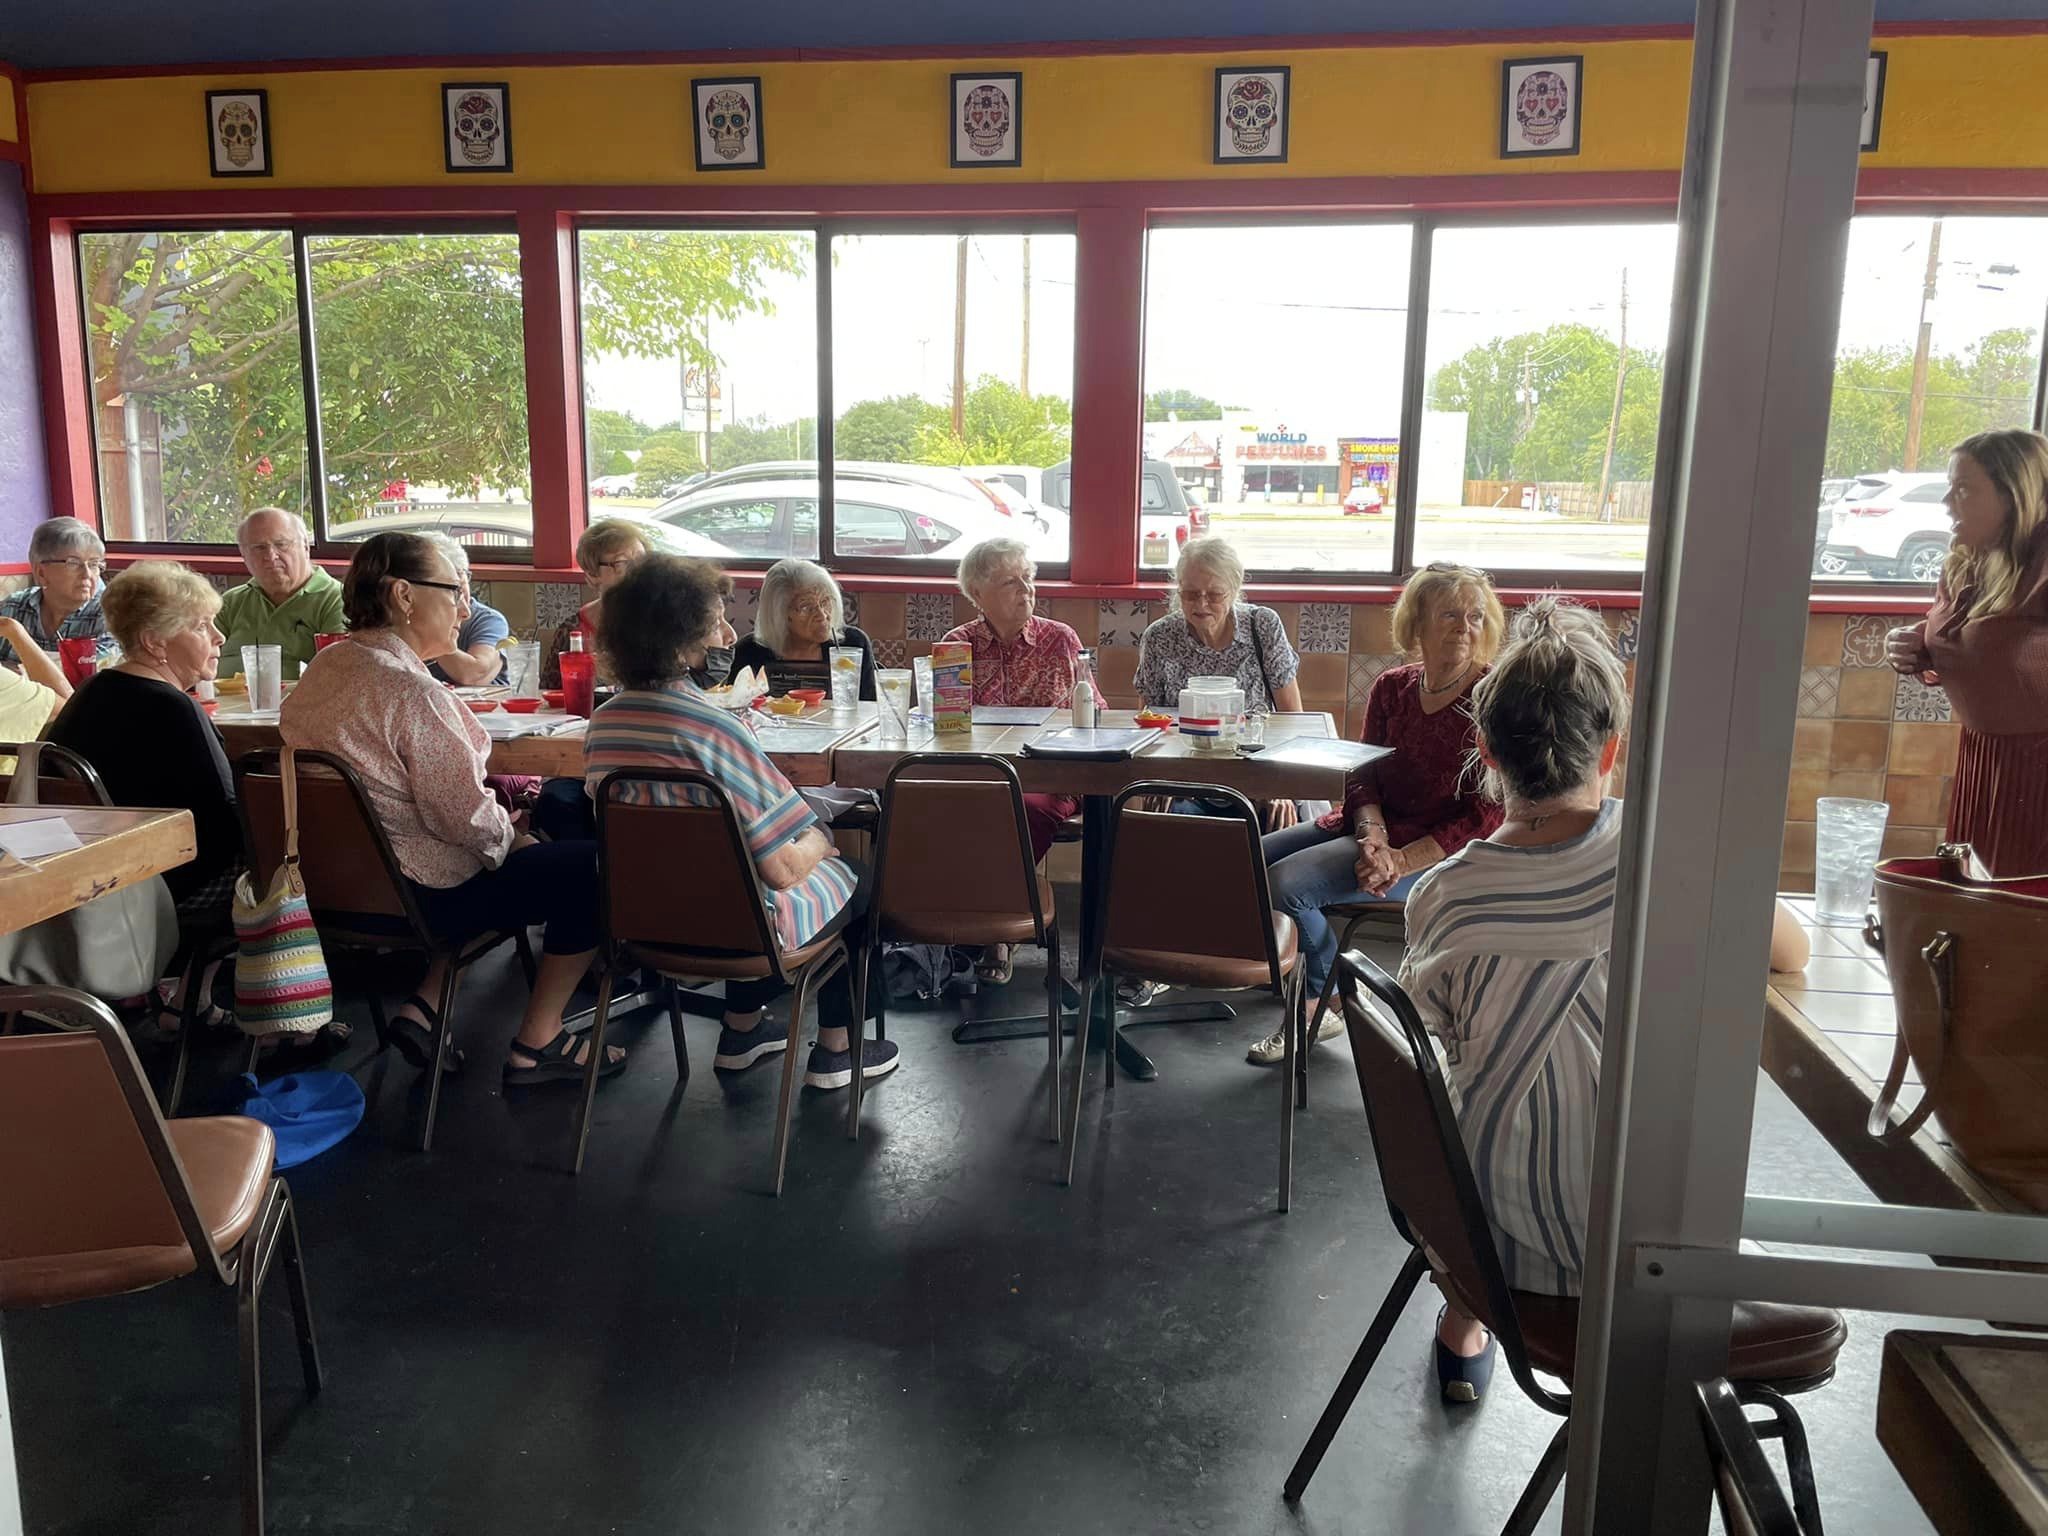 Texas Democratic Women of the Wichita Area Meetings every 2nd Monday for lunch